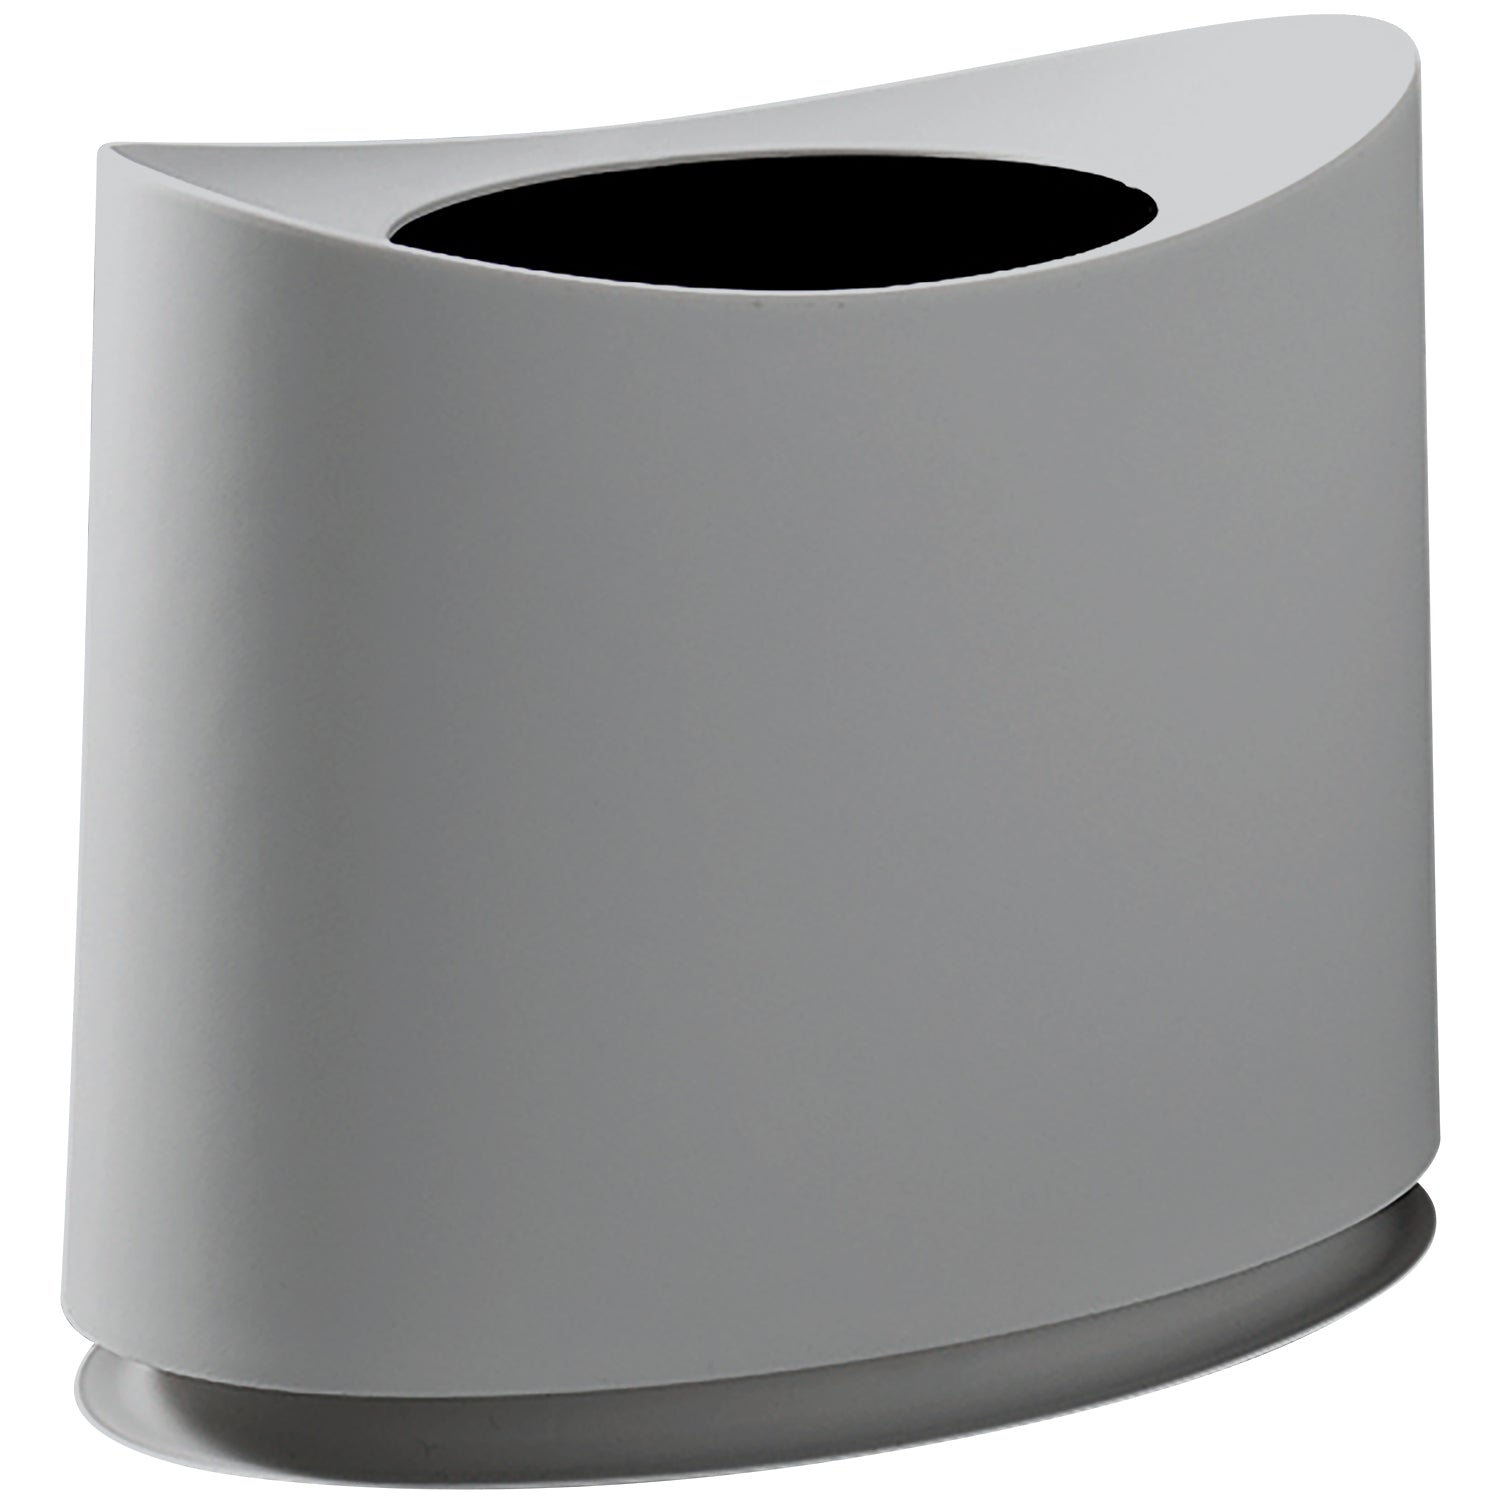 Load image into Gallery viewer, Slim Oval Plastic Trash Can | Garbage Bin w/ Removable Plastic Bin Liner Fit Flim Spaces